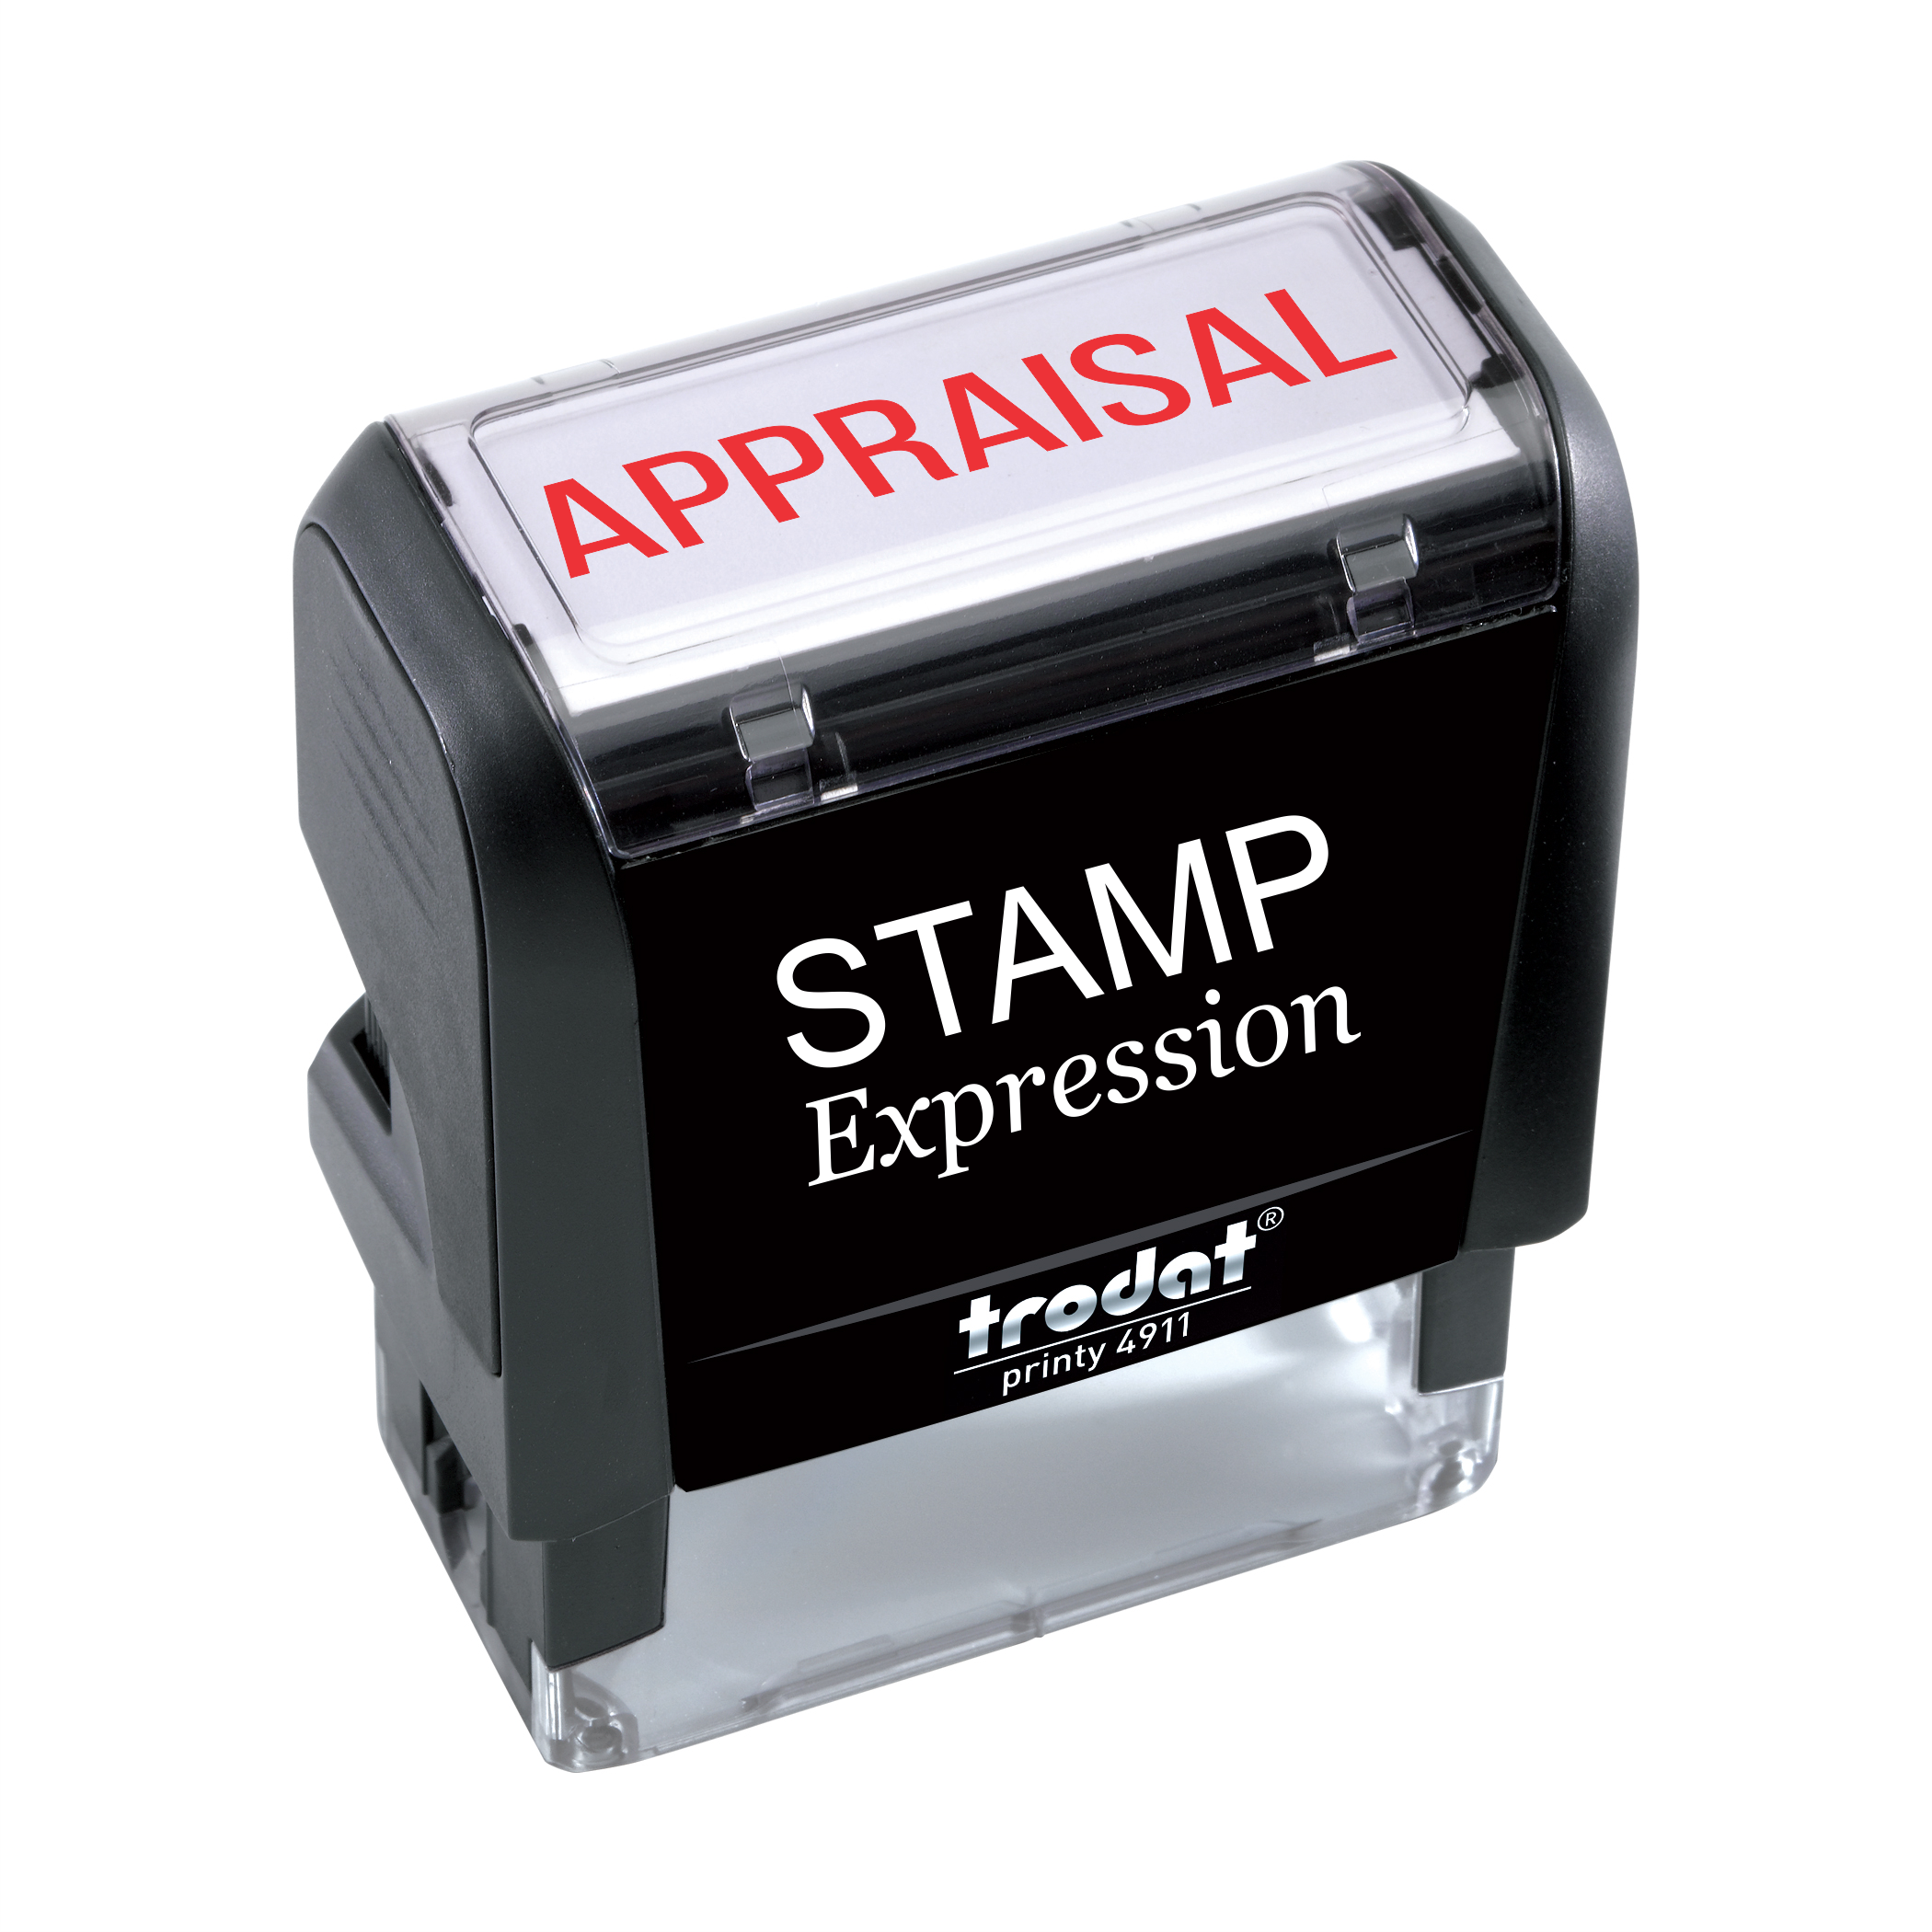 Appraisal Office Self Inking Rubber Stamp